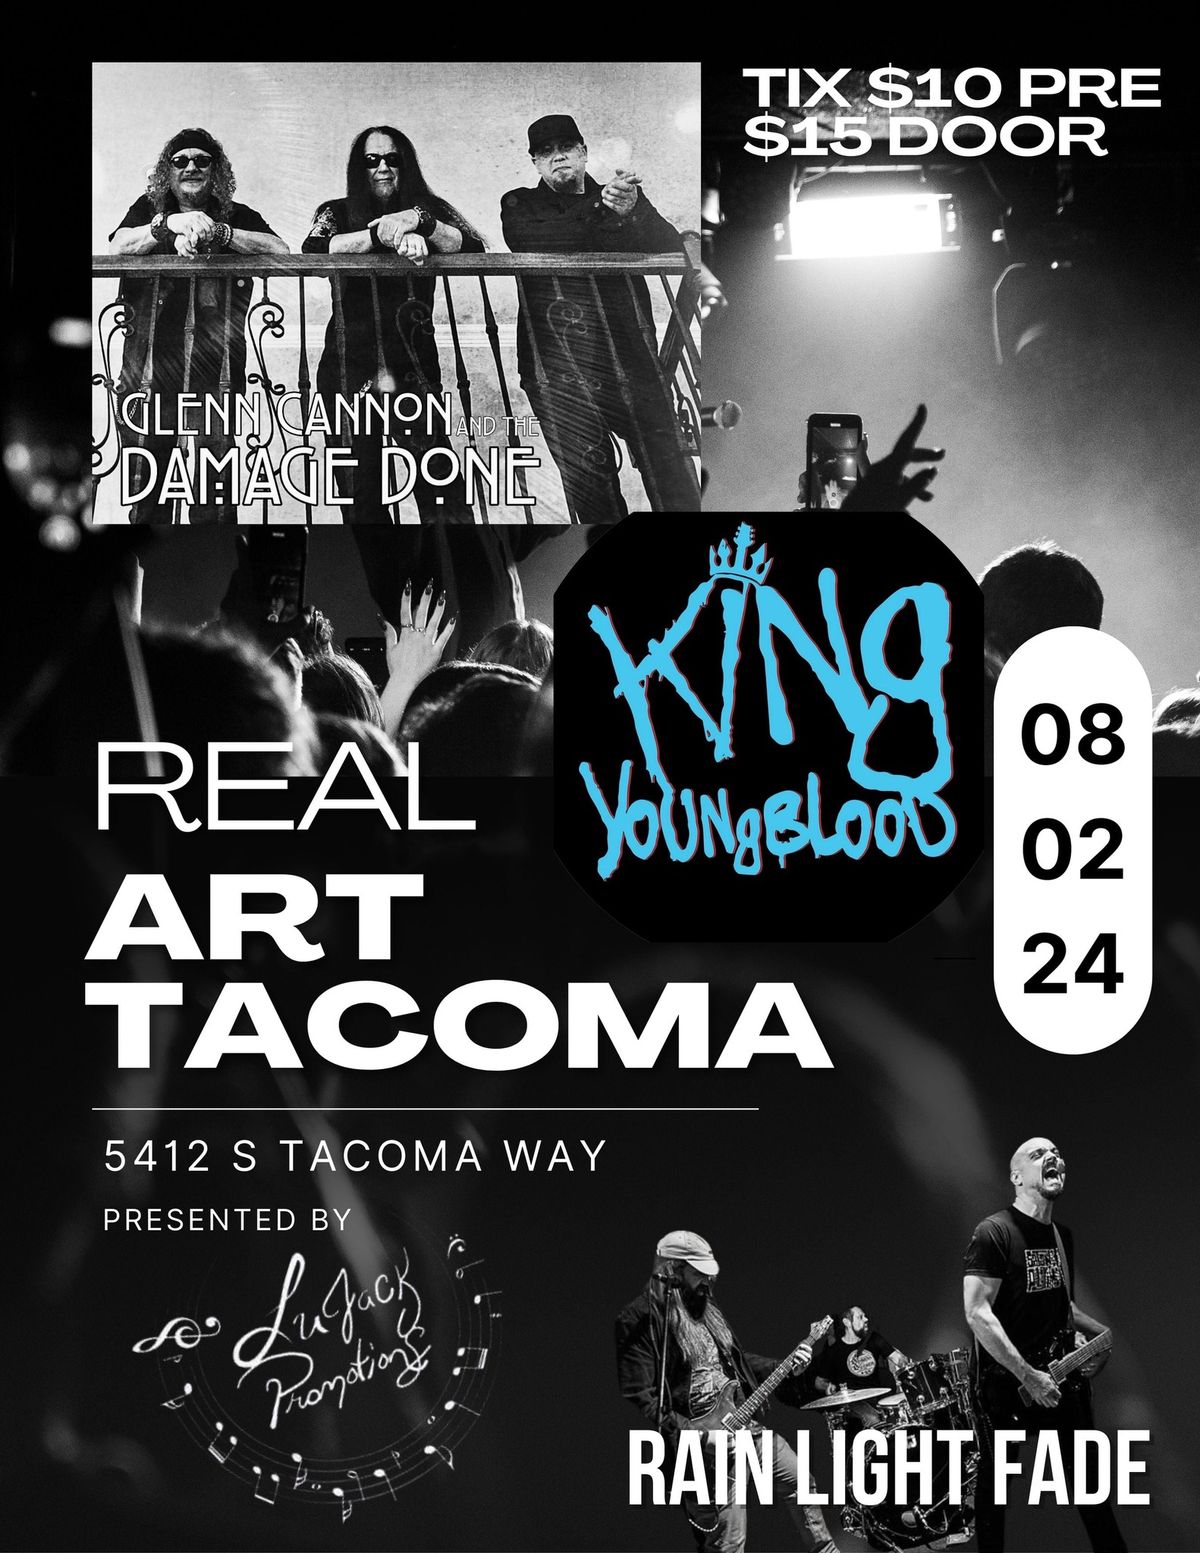 Lujack Promotions x Real Art Tacoma Presents: Glenn  Cannon and the Damage Done, King Youngblood, Ra